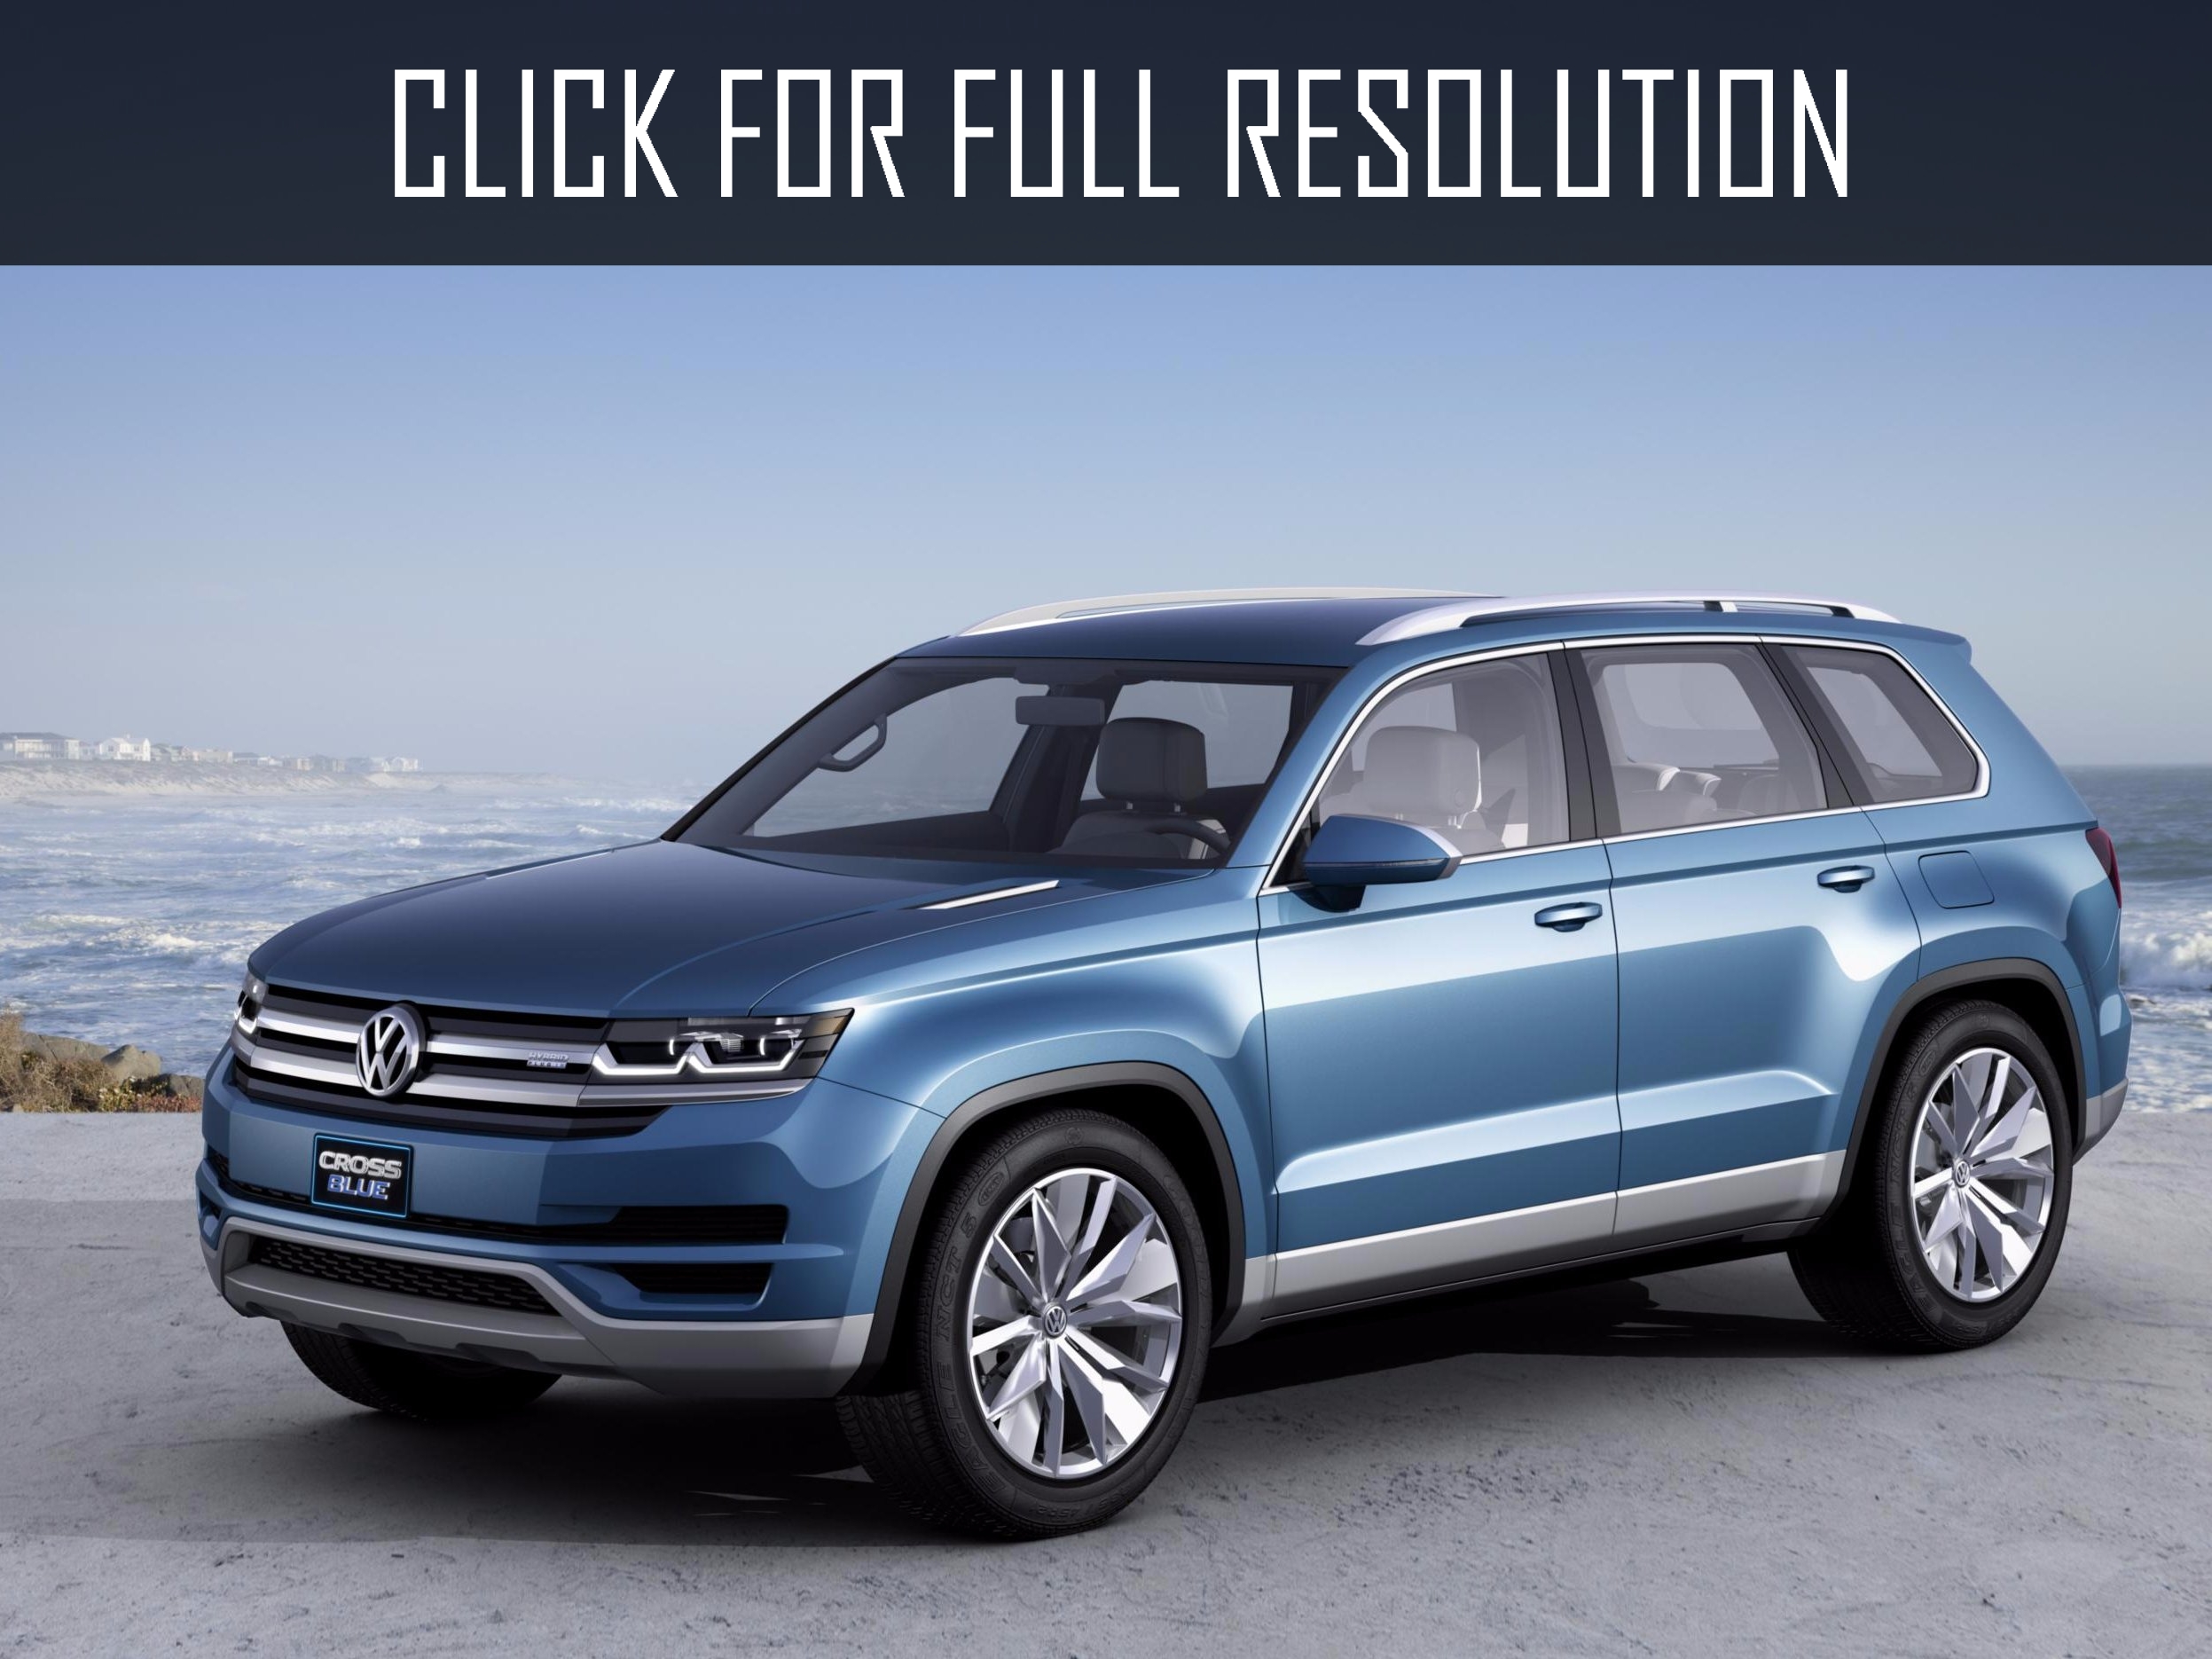 Volkswagen Suv - amazing photo gallery, some information and